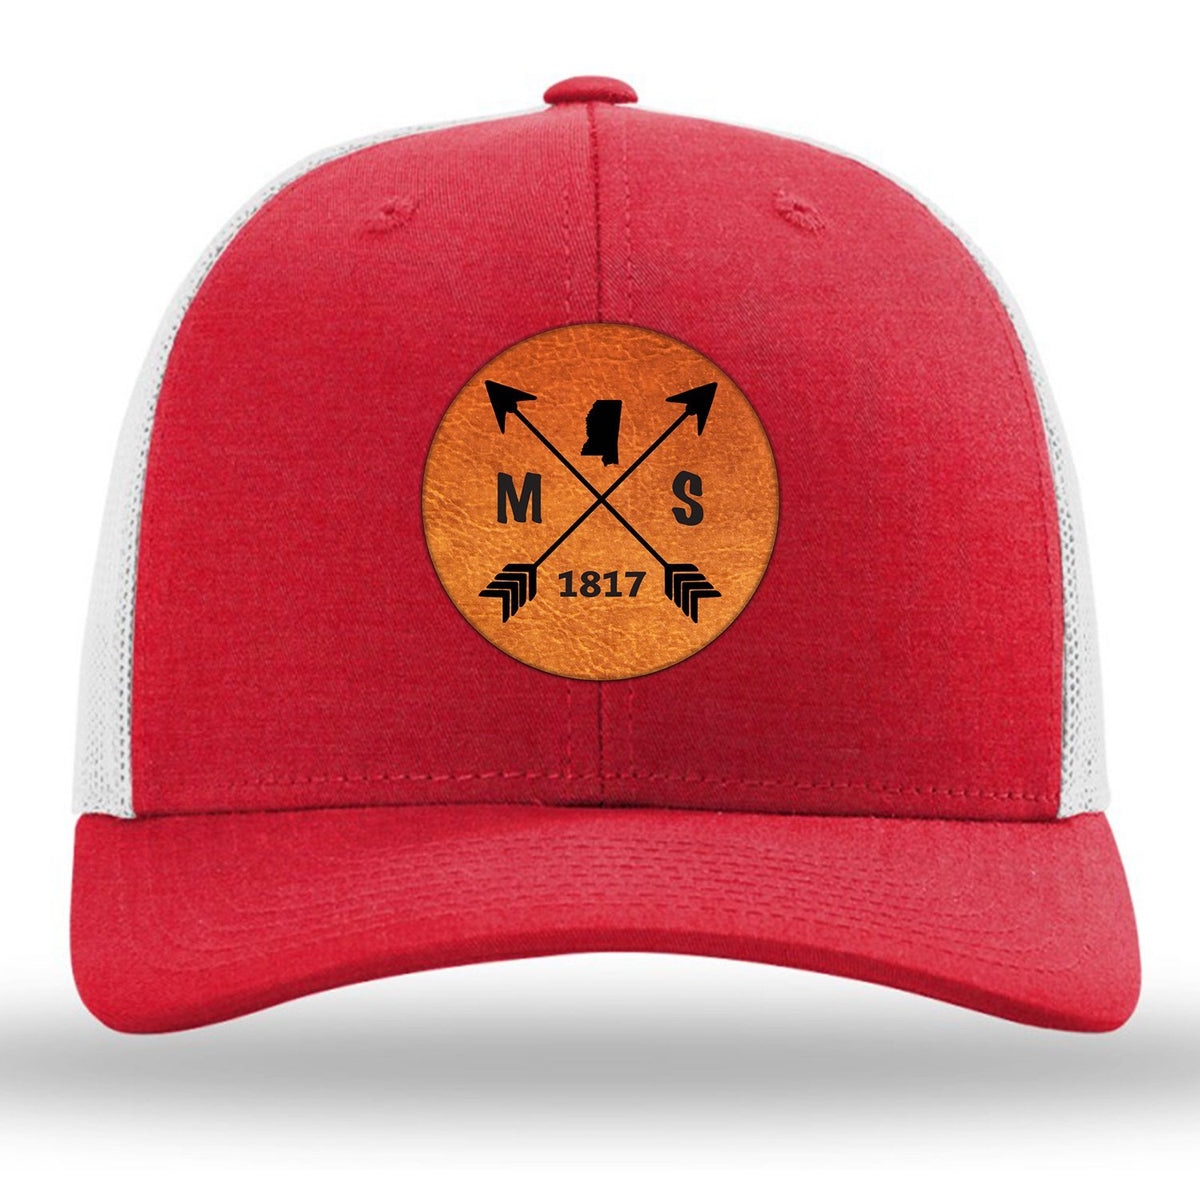 Mississippi State Arrows - Leather Patch Trucker Hat